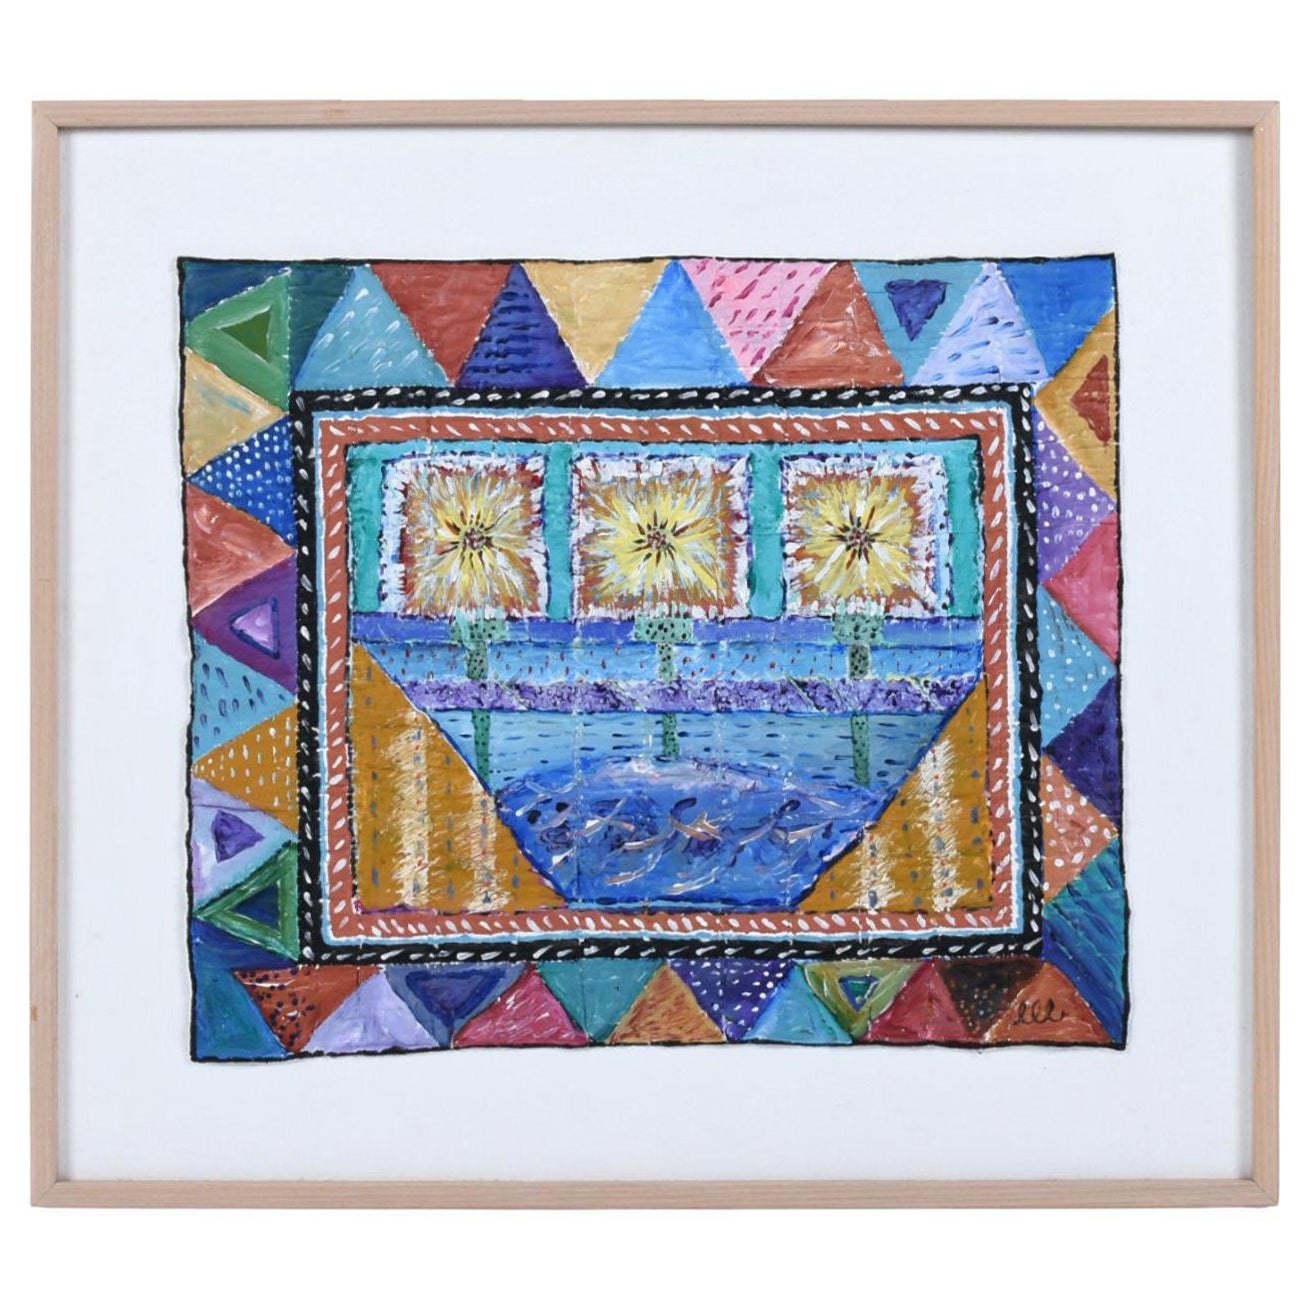 Contemporary Framed Quilted Textile Art Painting on Canvas